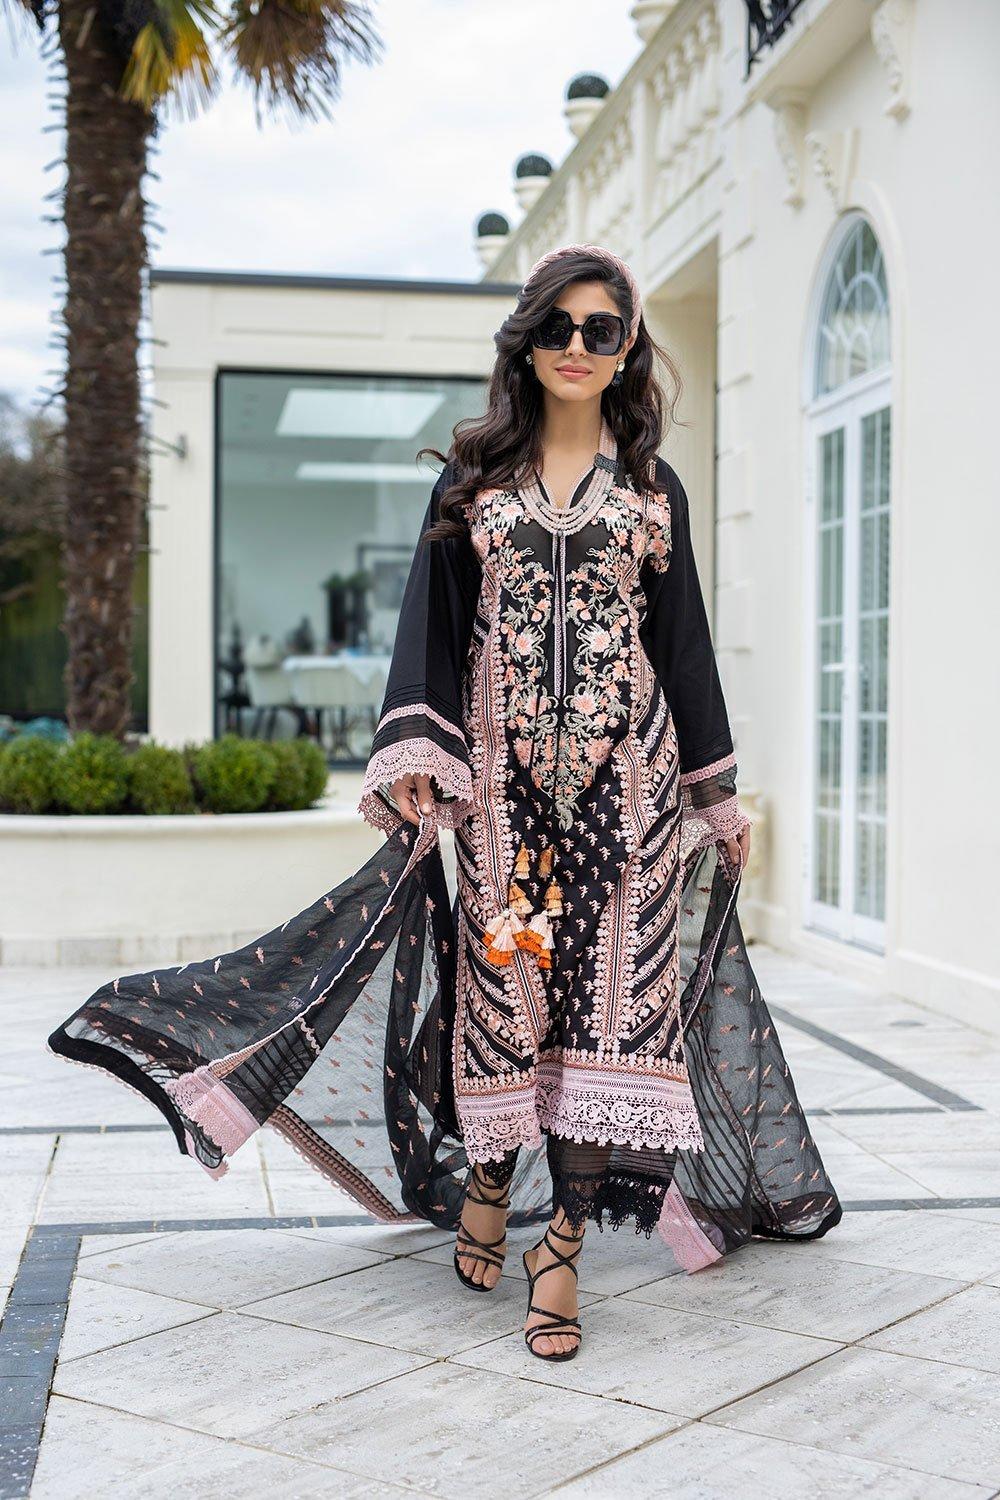 Buy Sobia Nazir’s Luxury Lawn Collection 2021 Black Lawn Dress from our website We are largest stockists of Sobia Nazir Lawn 2021 Maria b Pret collection The Pakistani suits are now trending in Mehndi, Eid Dresses Party dresses and Bridal Collection Buy dresses in Birmingham, UK USA Spain from Lebaasonline in SALE!